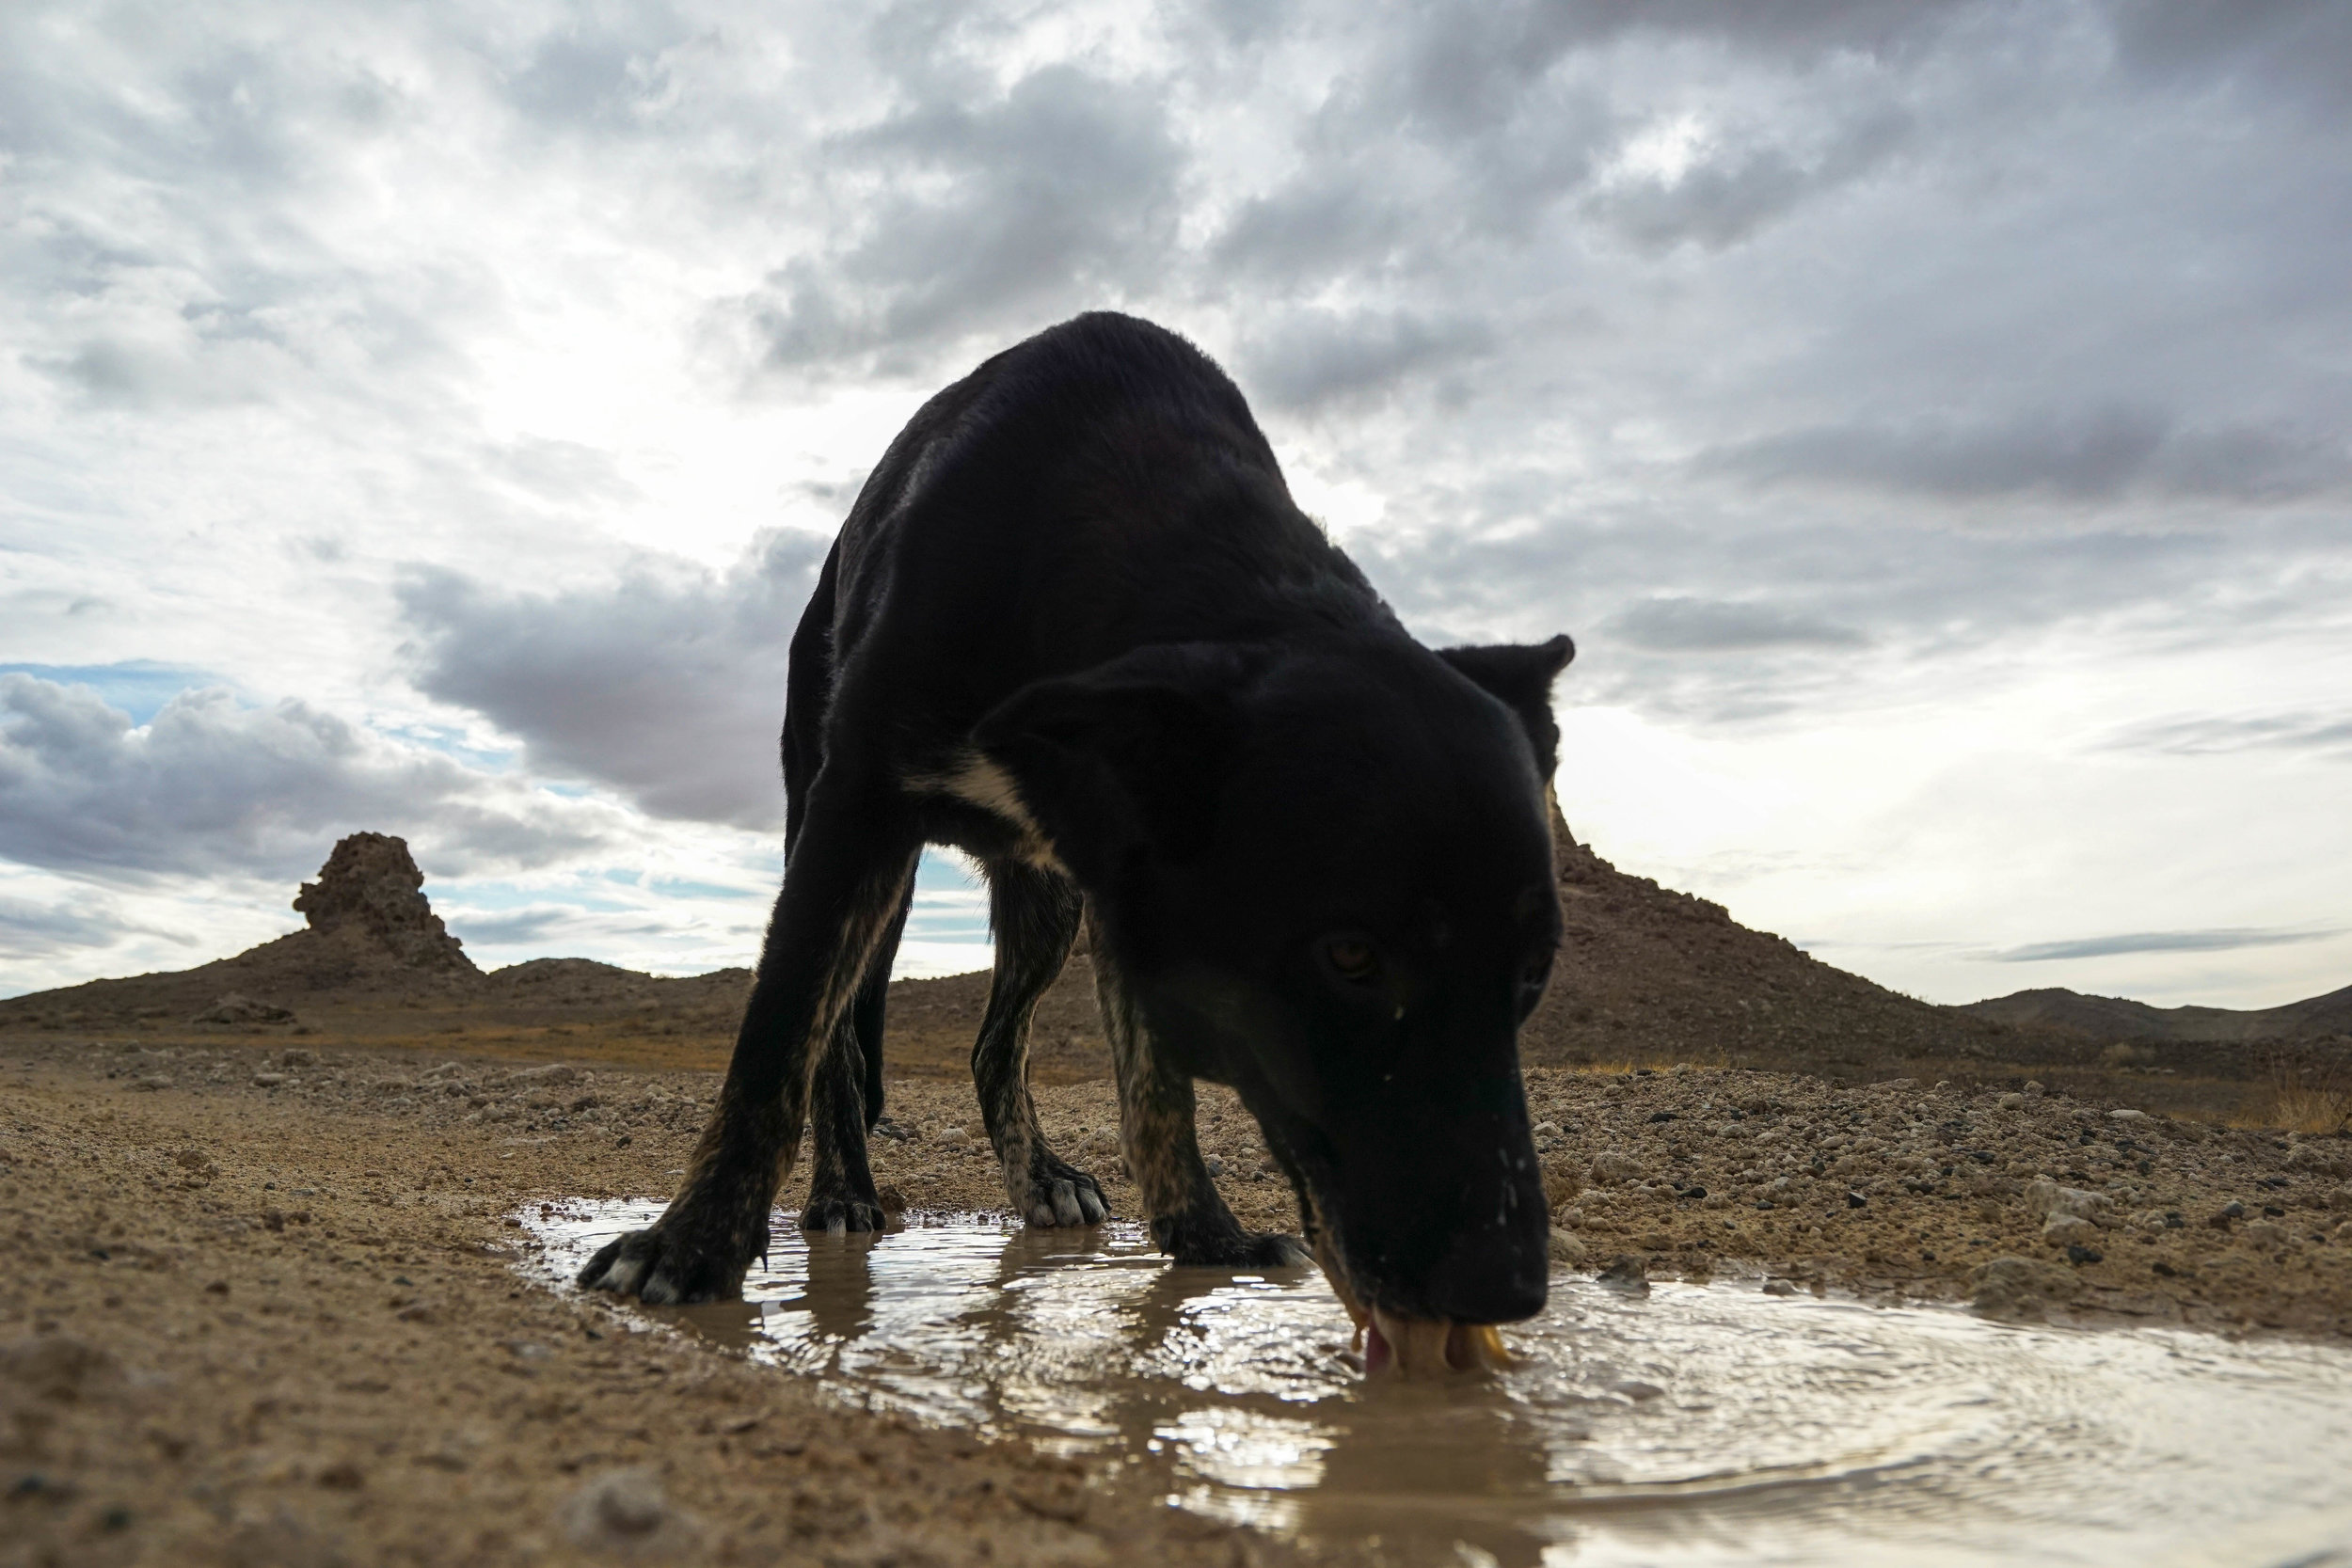 The rain even left behind some water for ole' Zero. Pools like this don't last long in the desert; its presence was a sweet reminder of the rare conditions we were witnessing.